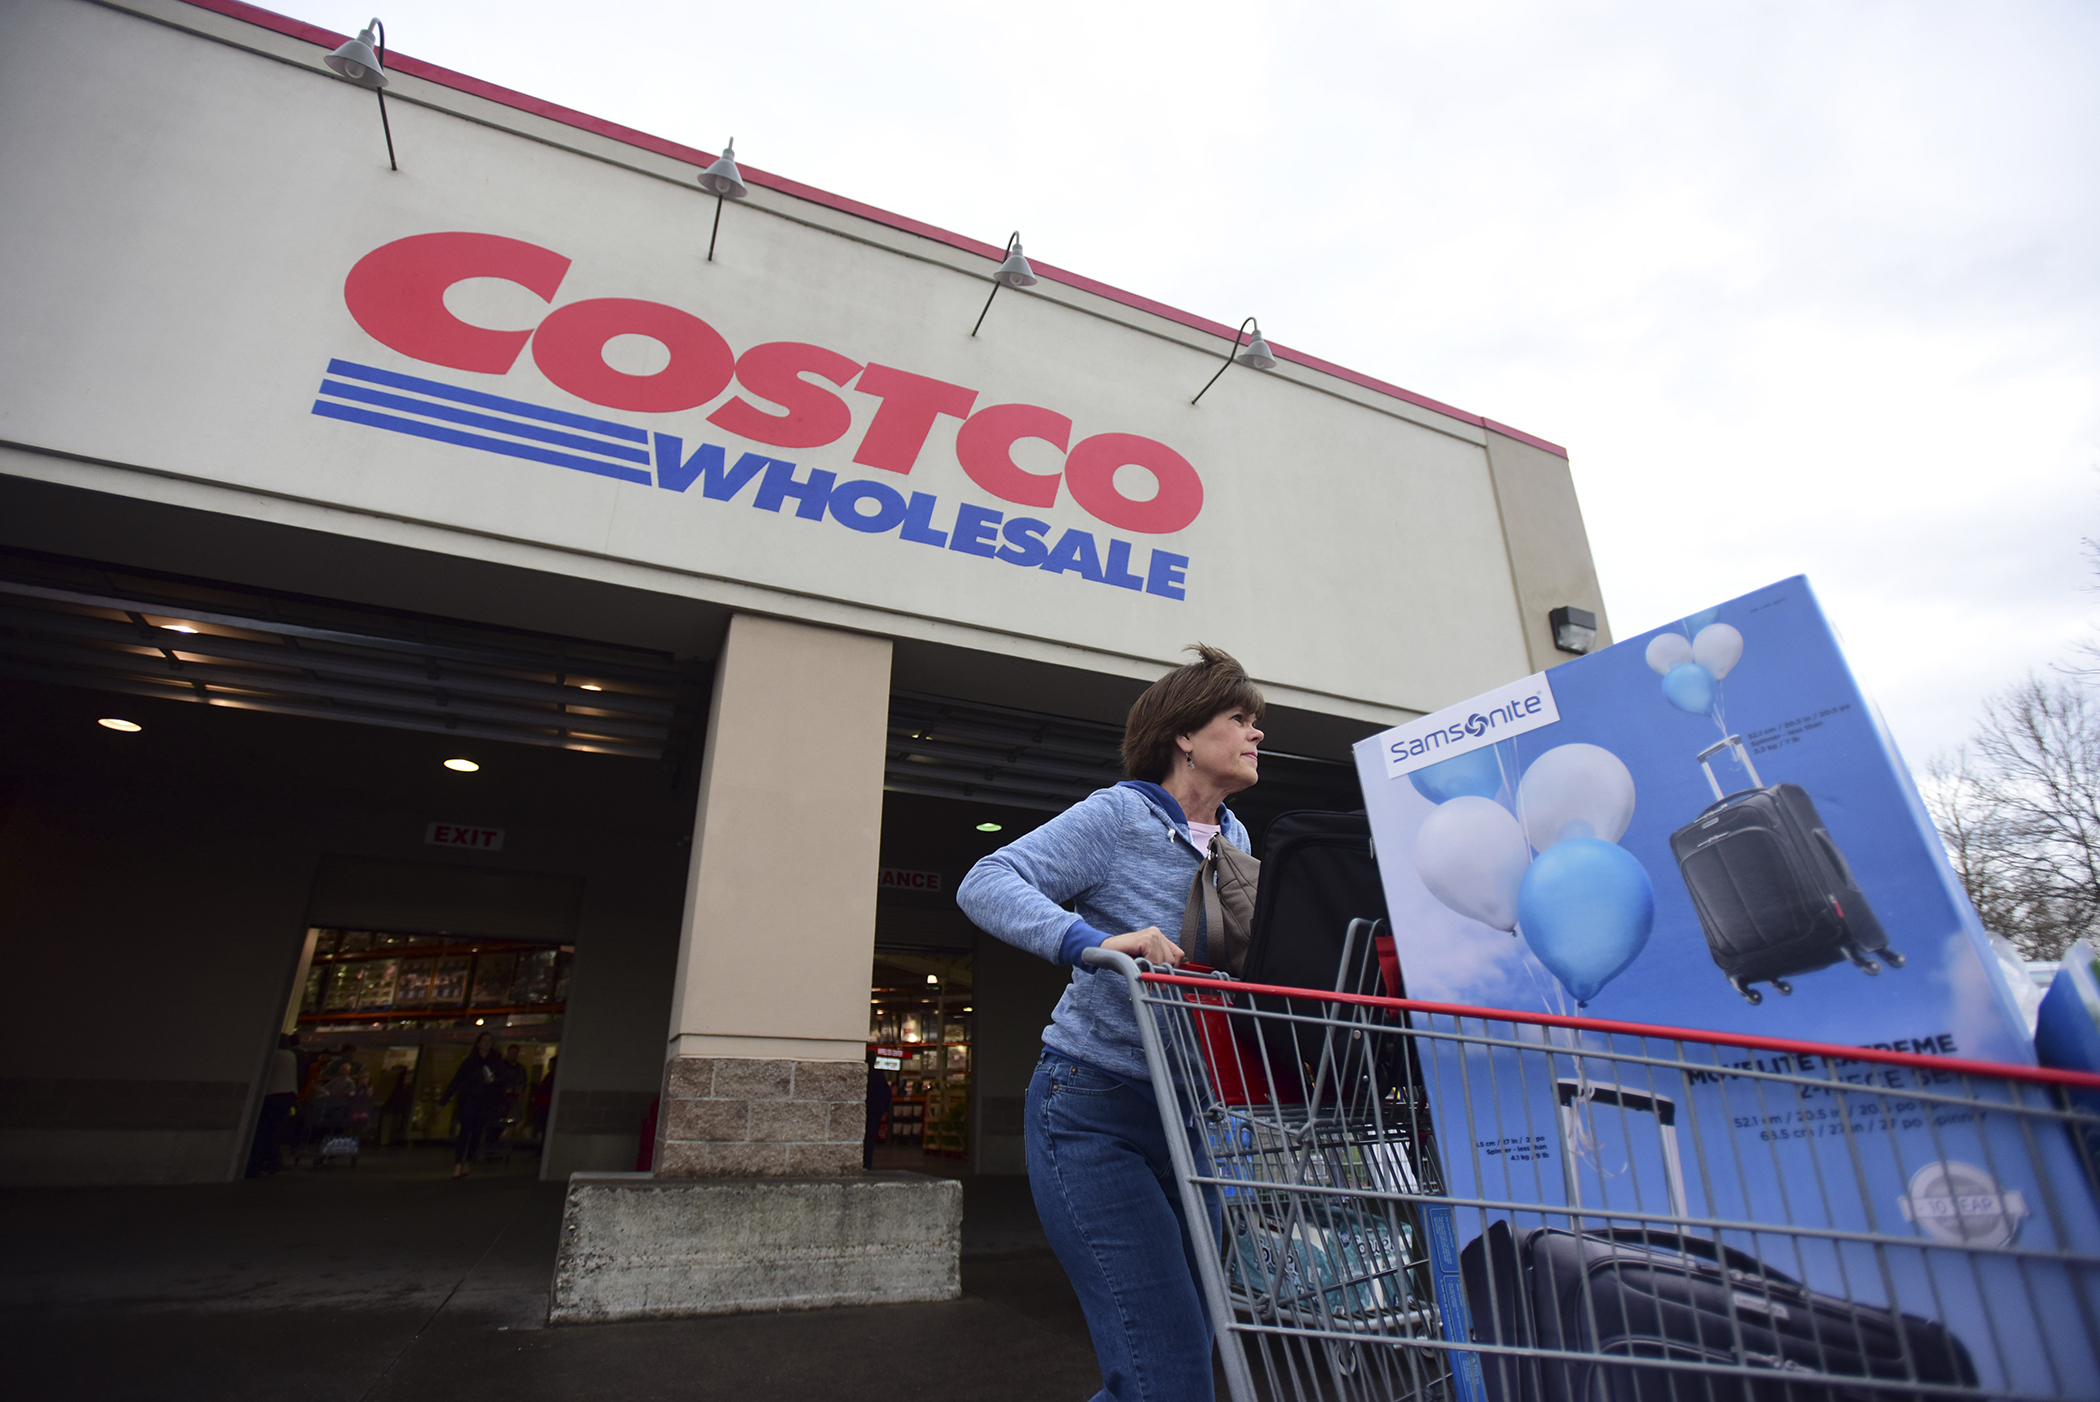 does costco have membership fees